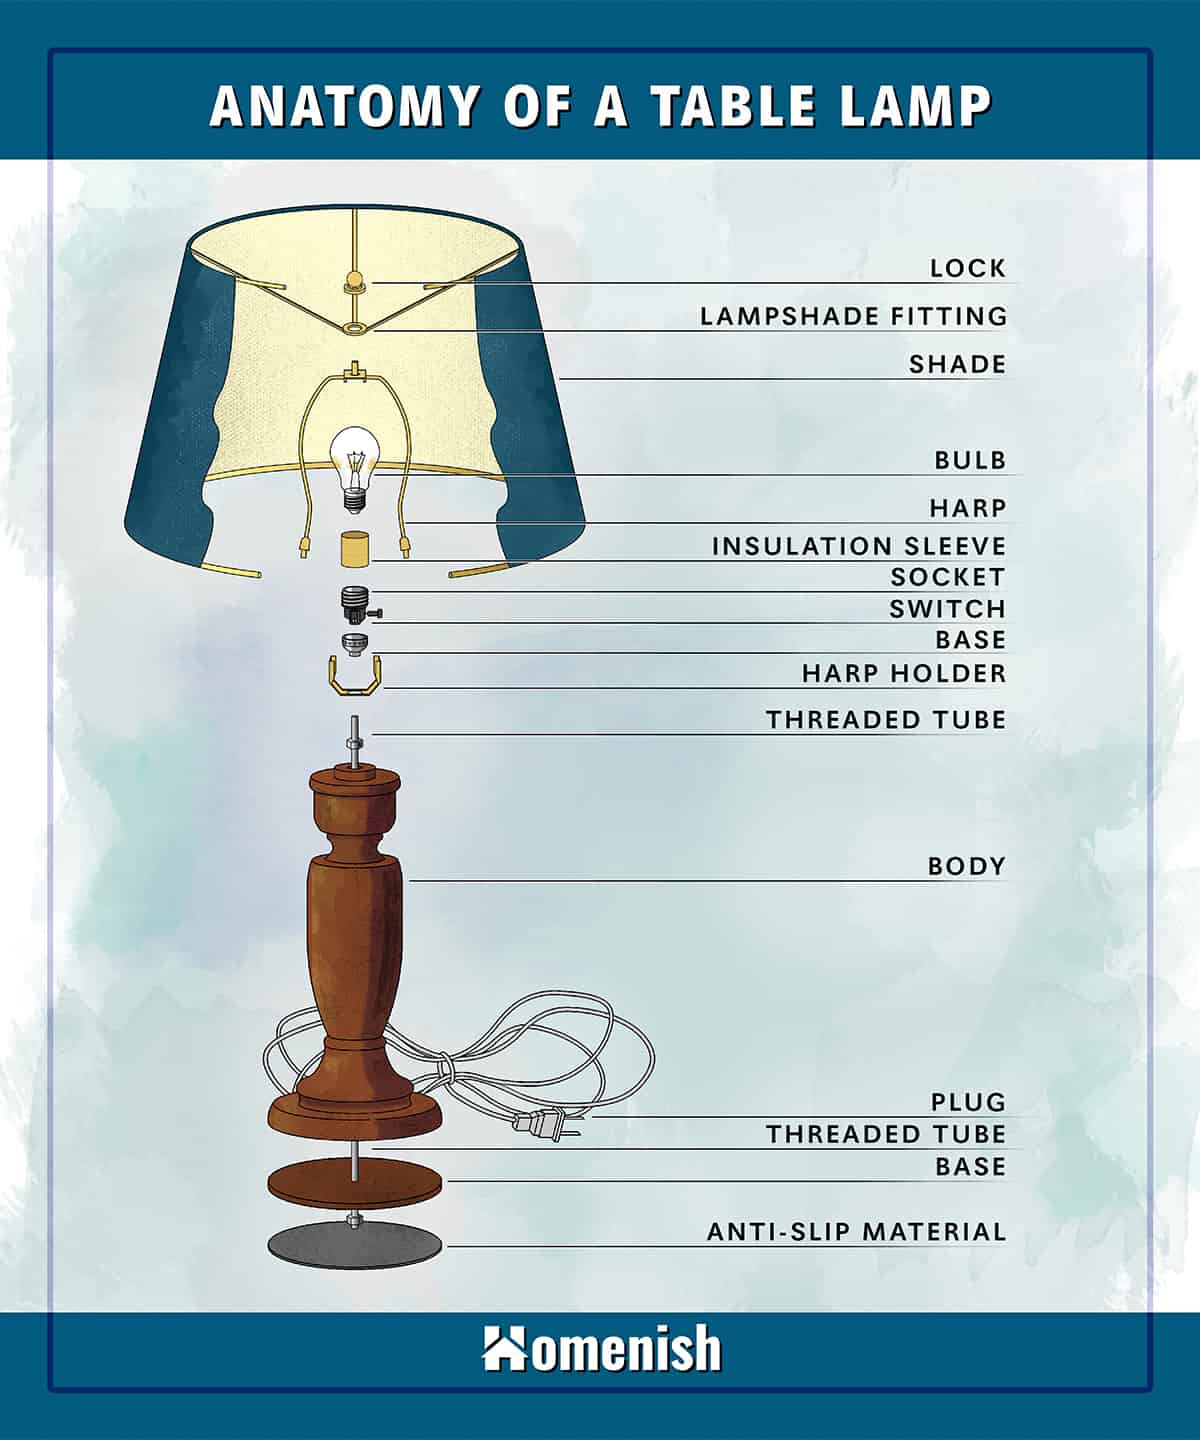 Anatomy of a Lamp